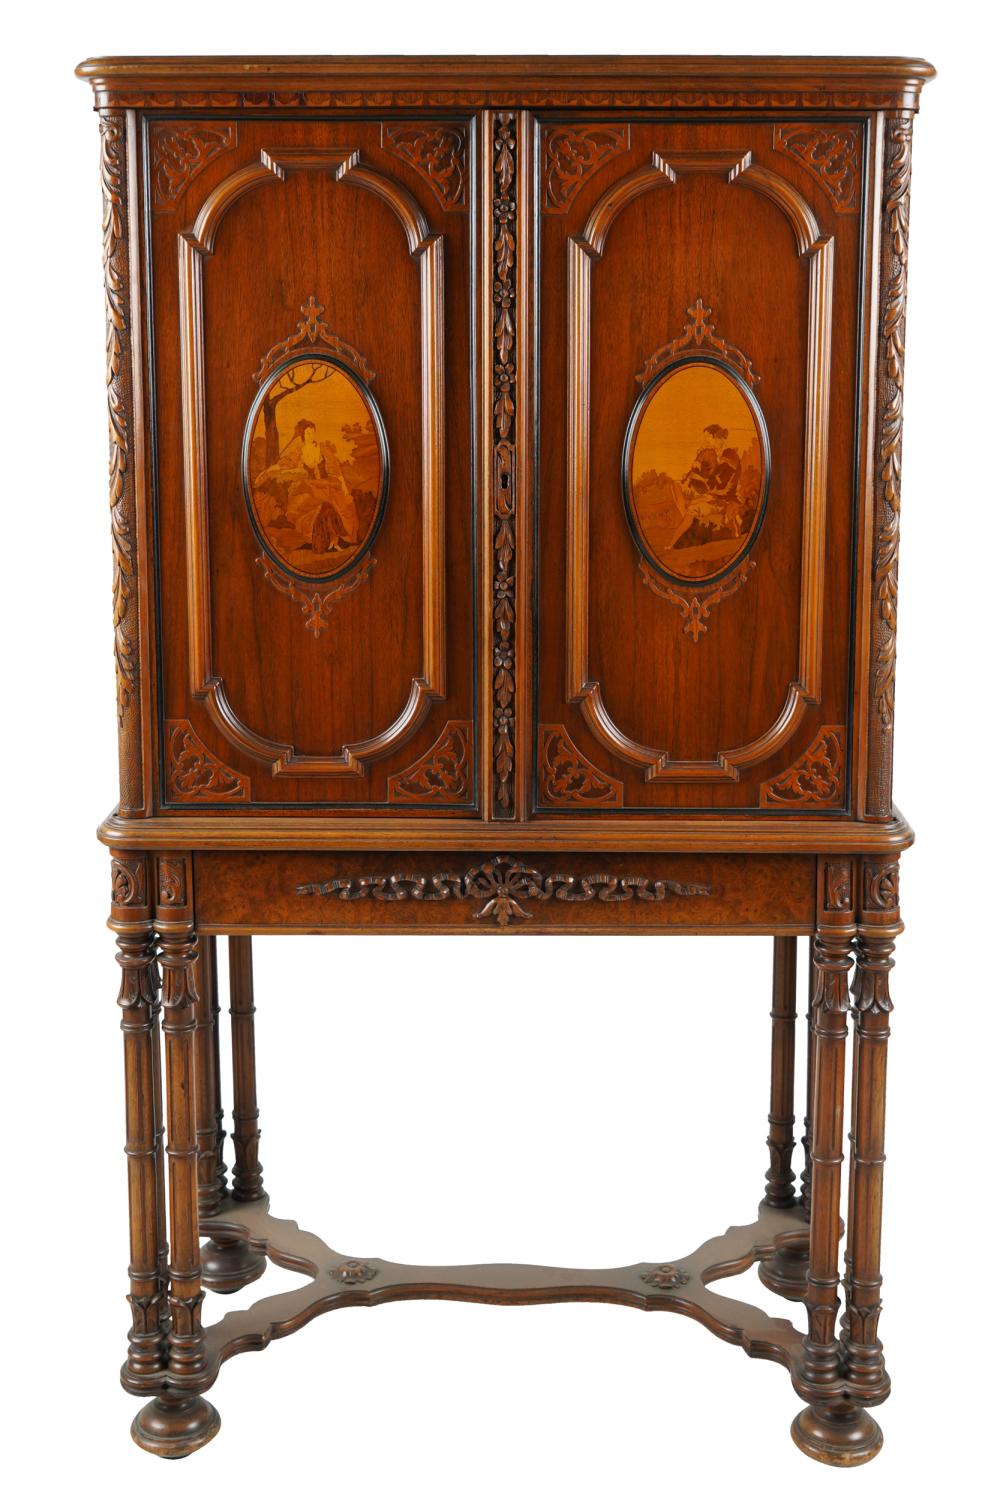 CARVED WALNUT & MARQUETRY CABINET